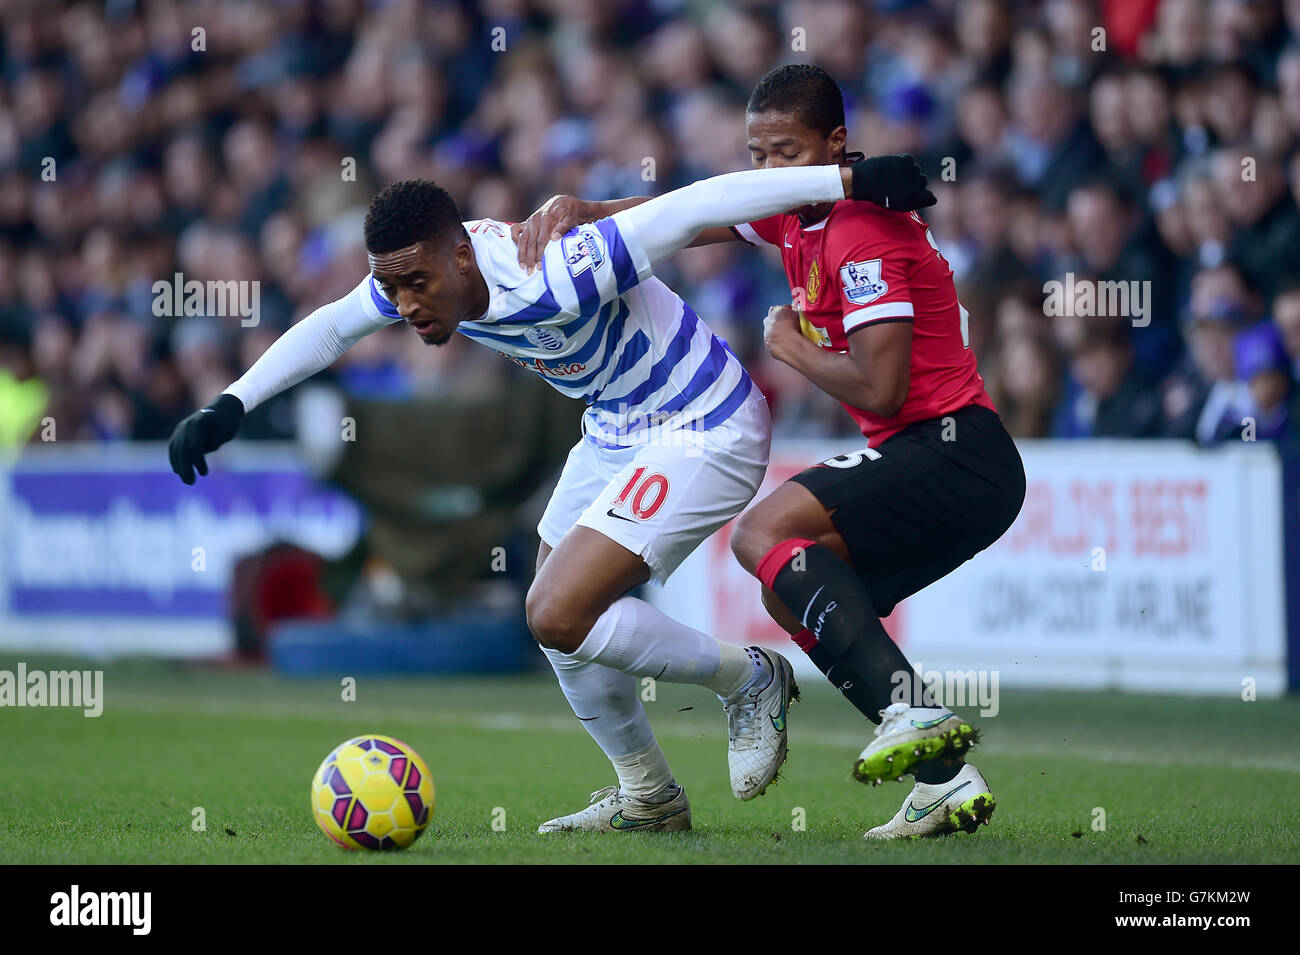 Queens Park Rangers' Leroy Fer (left) and Manchester United's Luis Antonio Valencia (right) battle for the ball during the Barclays Premier League match at Loftus Road, London. PRESS ASSOCIATION Photo. Picture date: Saturday January 17, 2015. See PA story SOCCER QPR. Picture credit should read: Adam Davy/PA Wire. Stock Photo